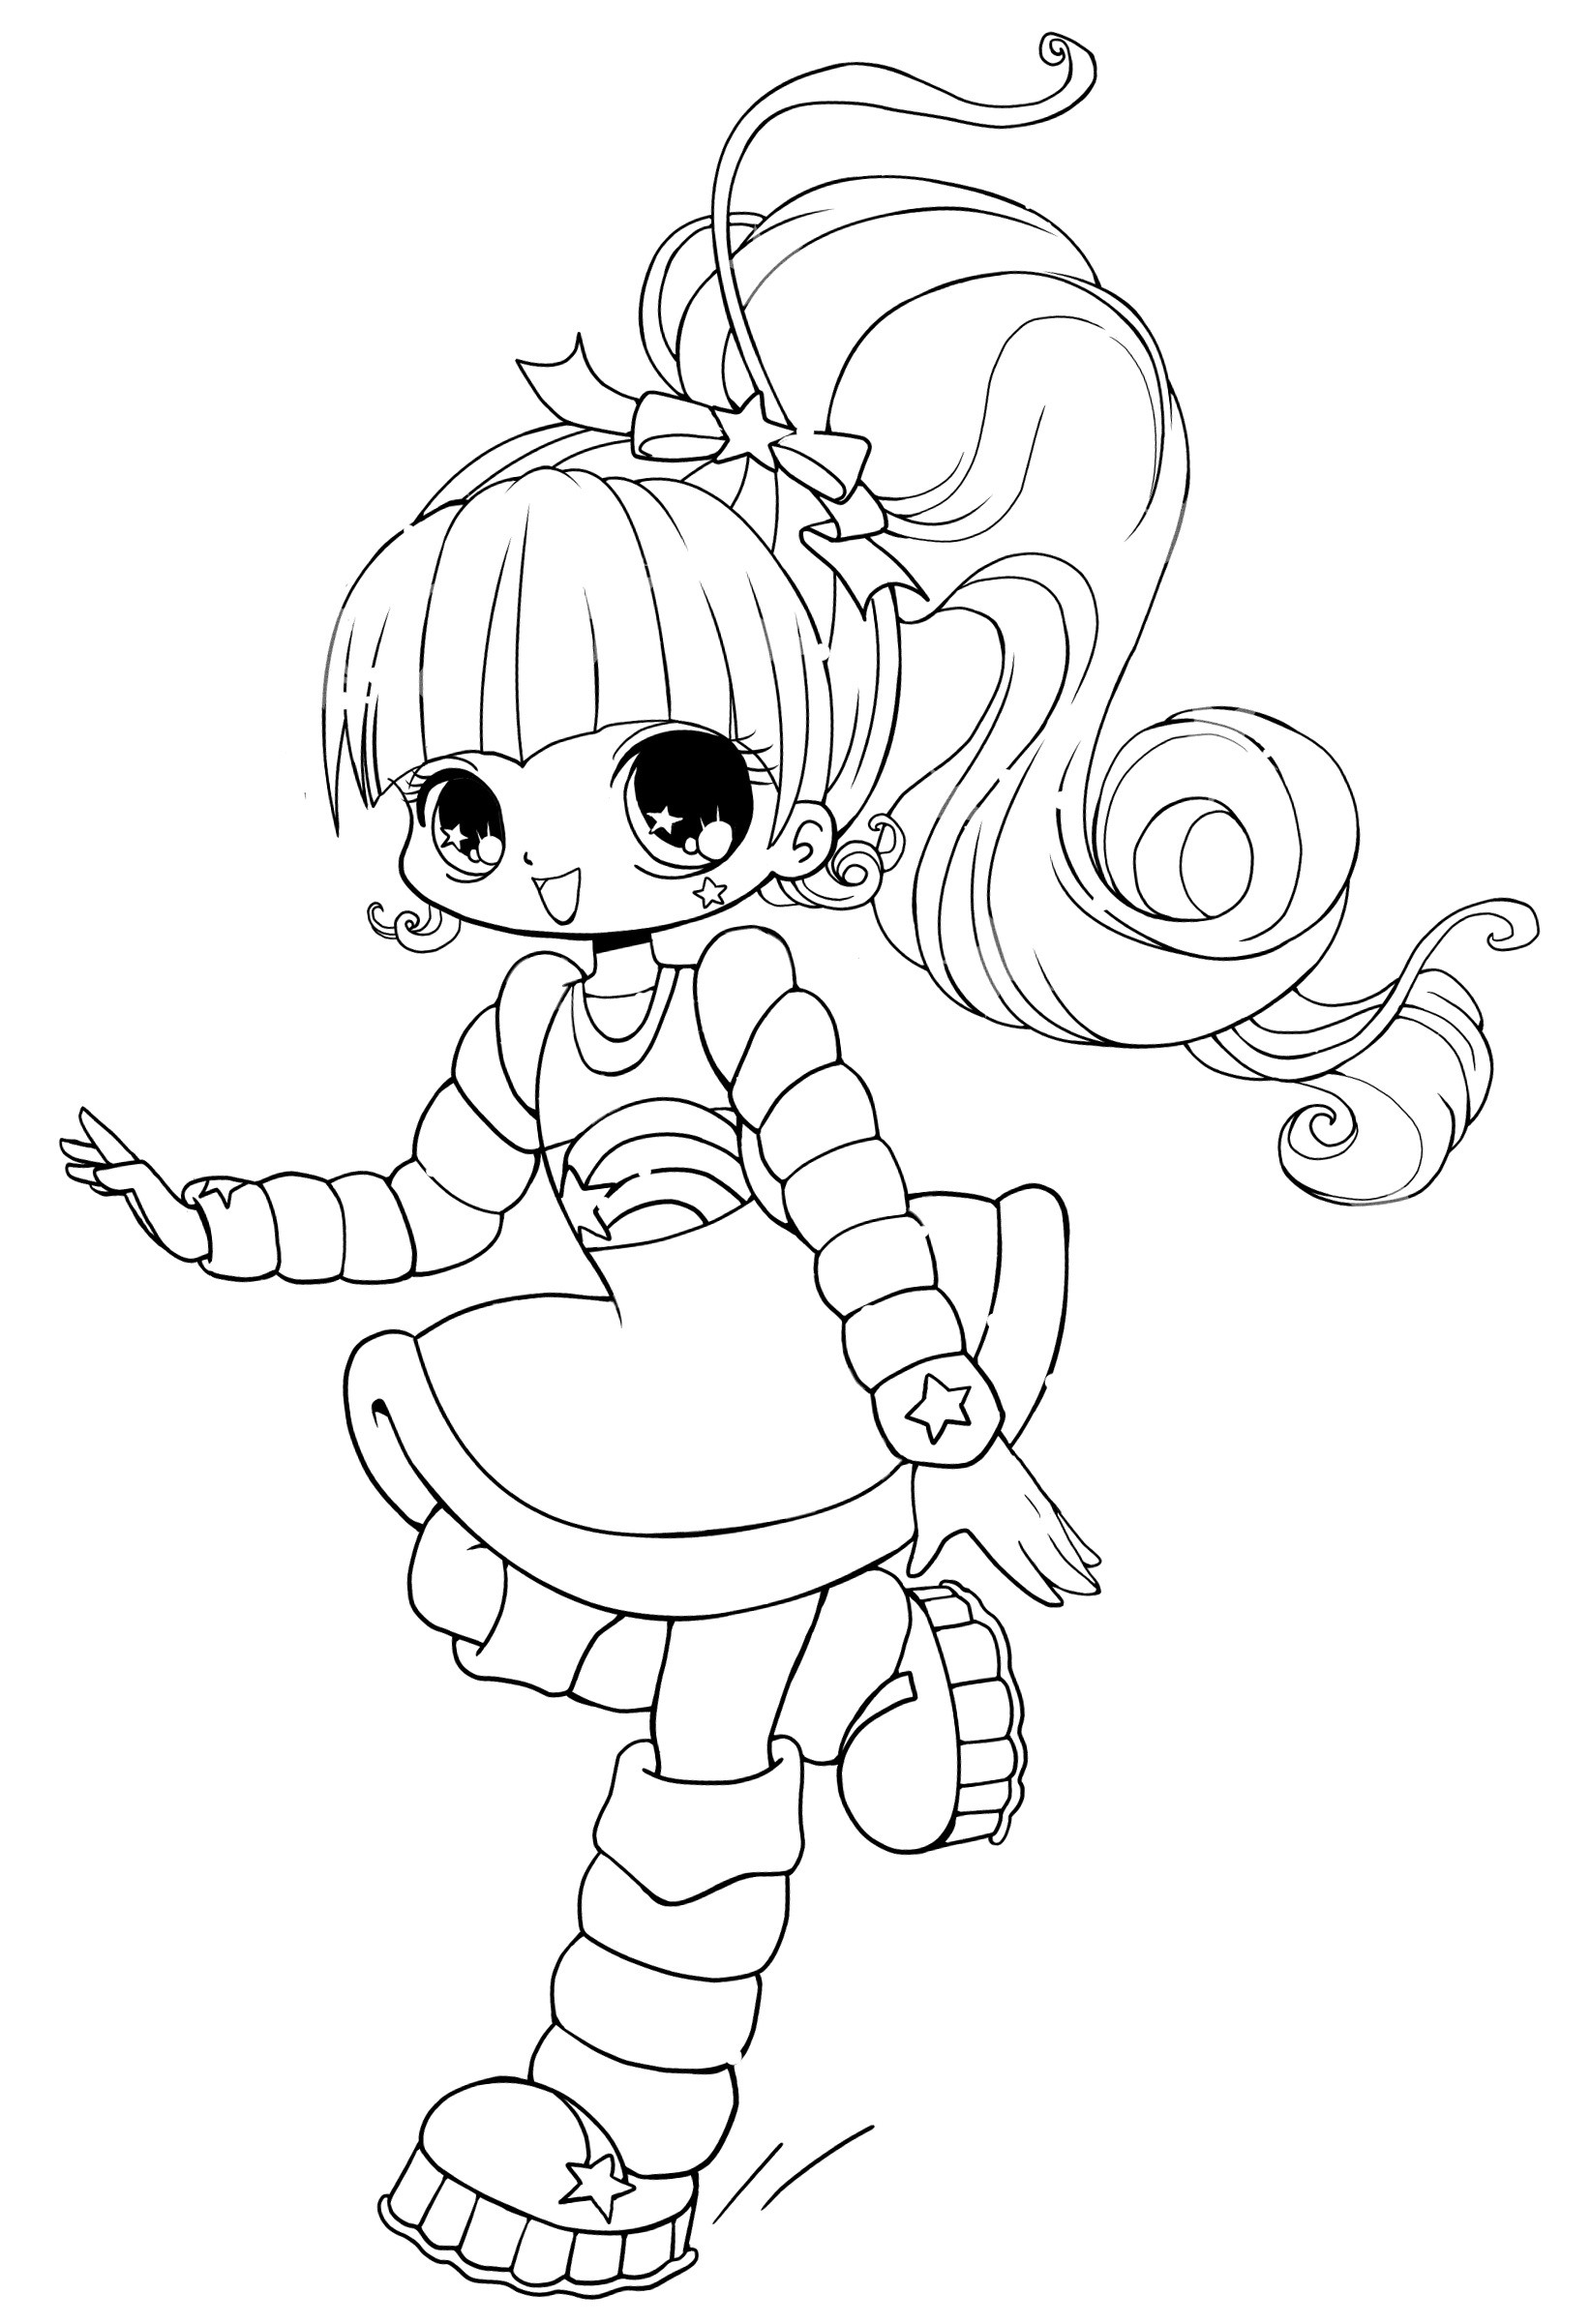 Coloring Pages Cute
 Free Printable Chibi Coloring Pages For Kids